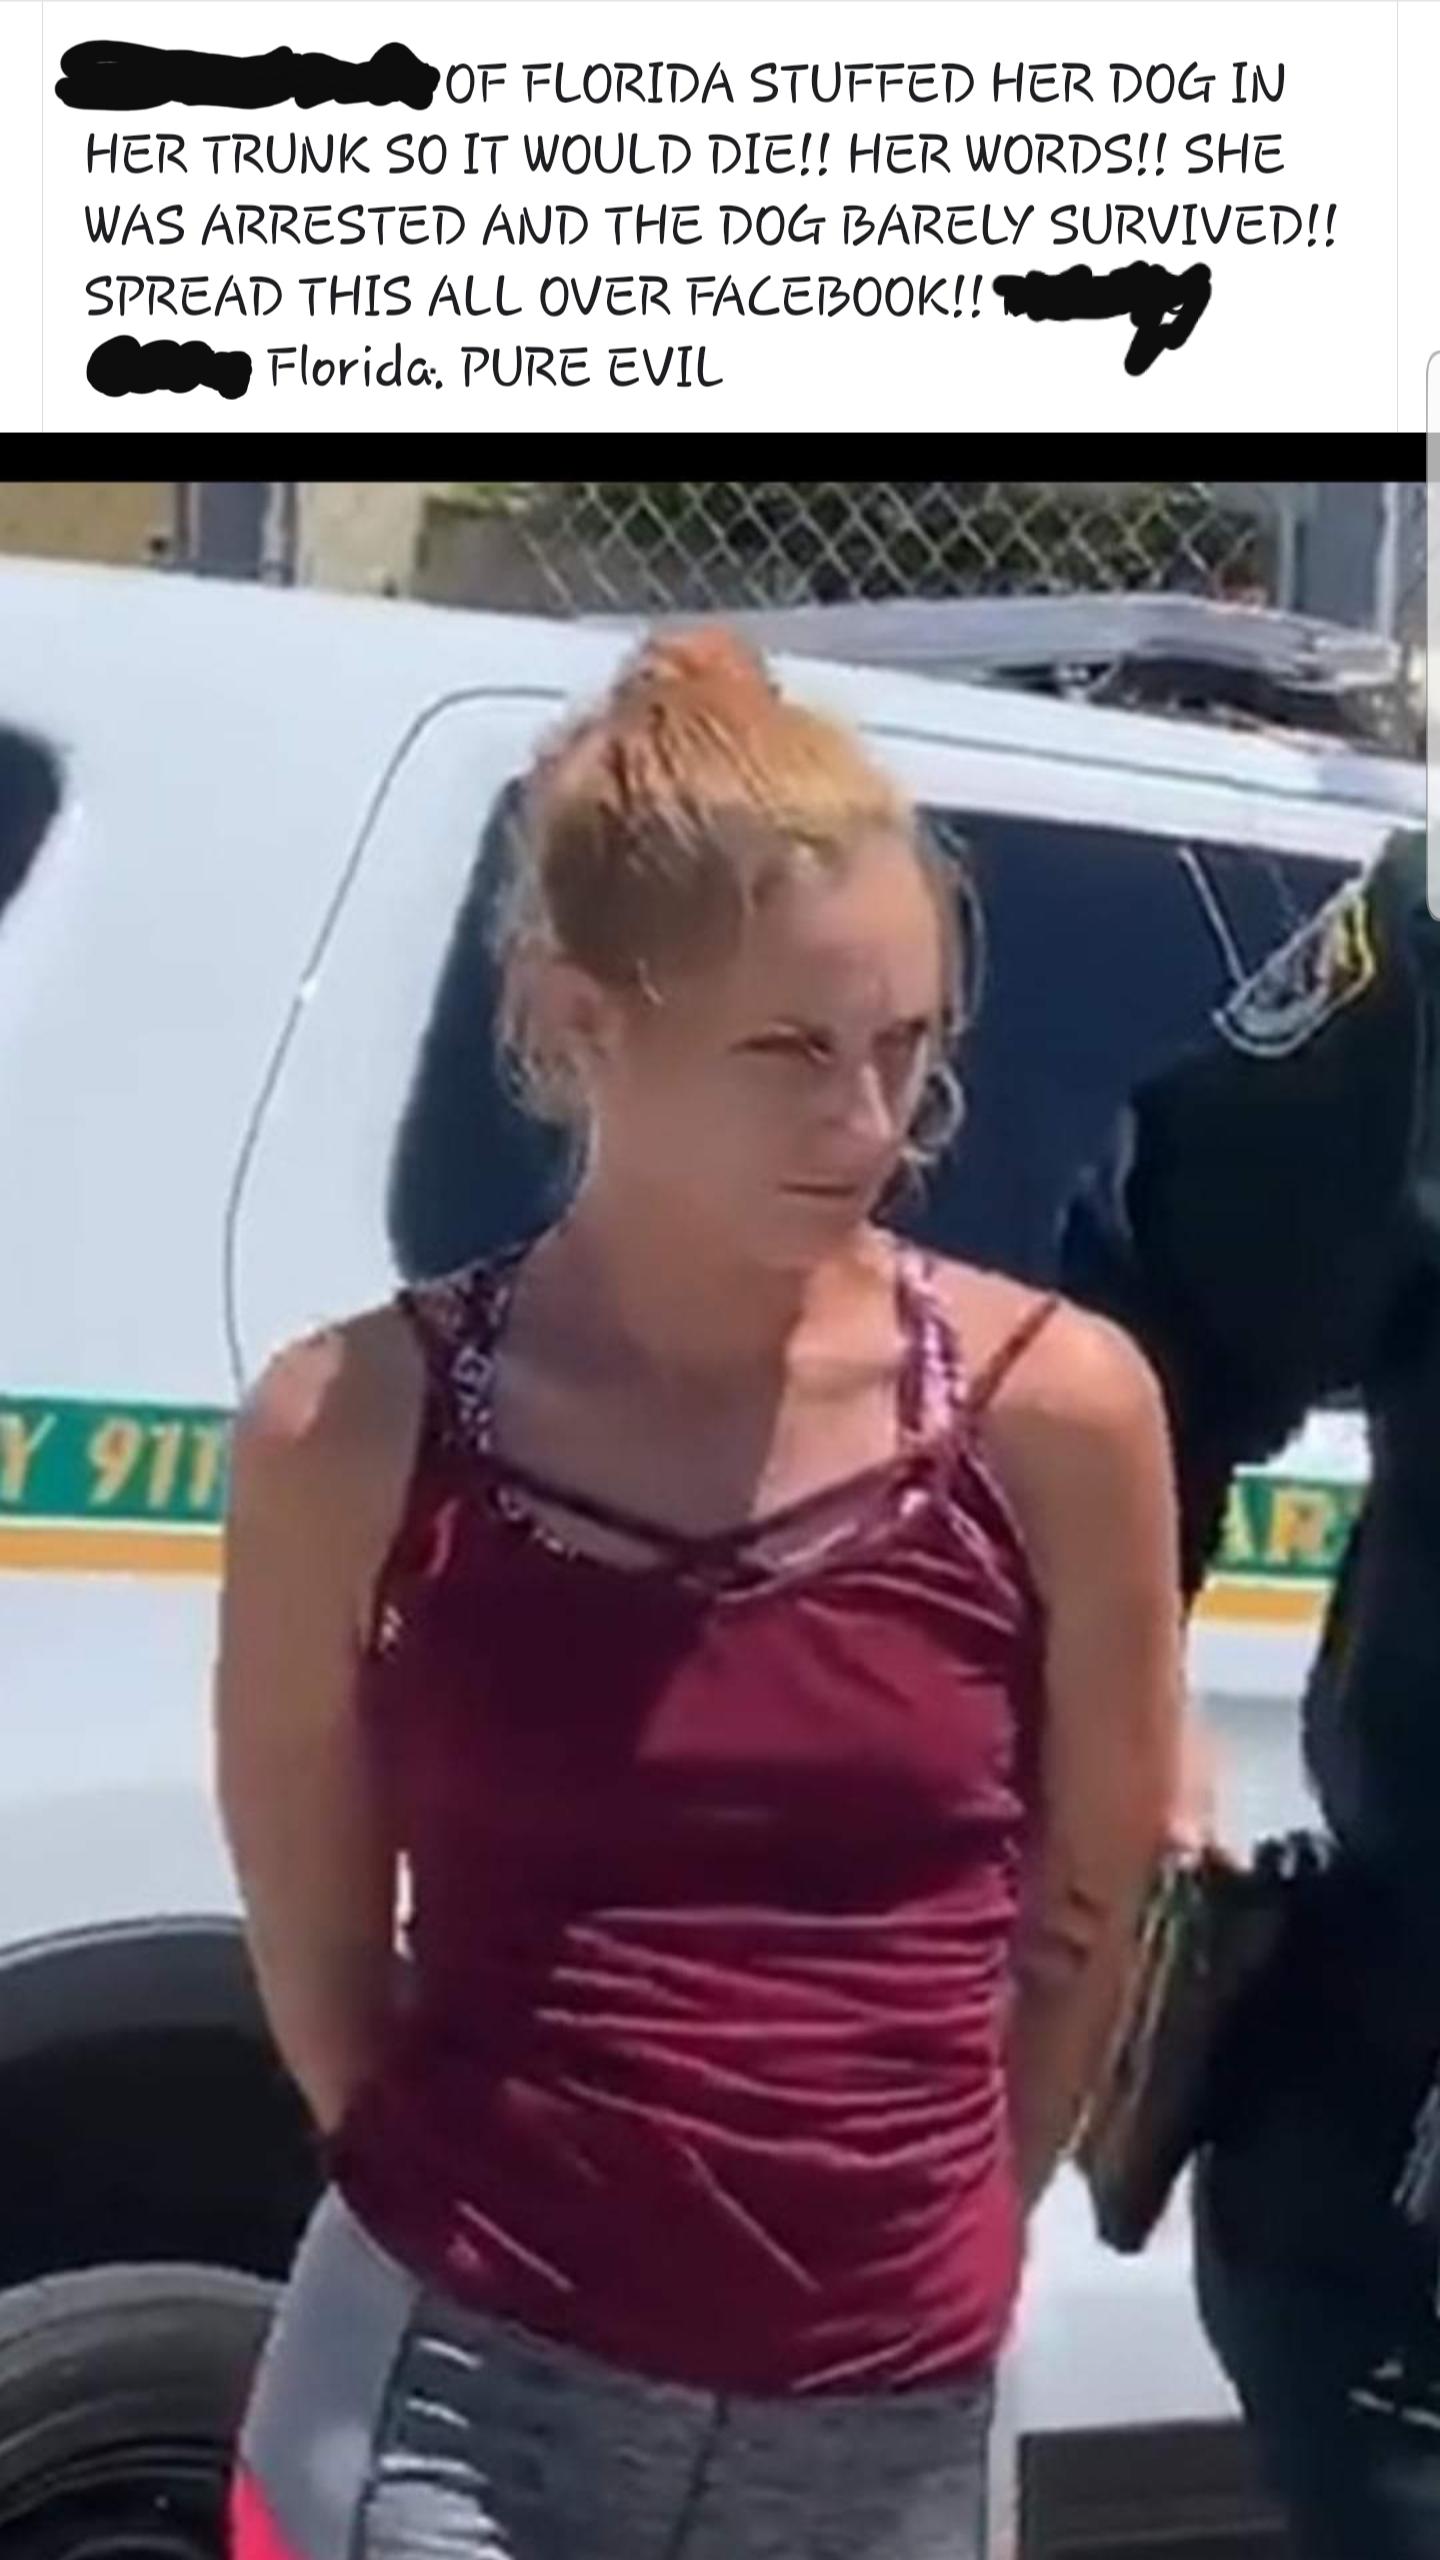 sarah perry arrested - Of Florida Stuffed Her Dog In Her Trunk So It Would Die!! Her Words!! She Was Arrested And The Dog Barely Survived!! Spread This All Over Facebook!! Florida Pure Evil Y 977